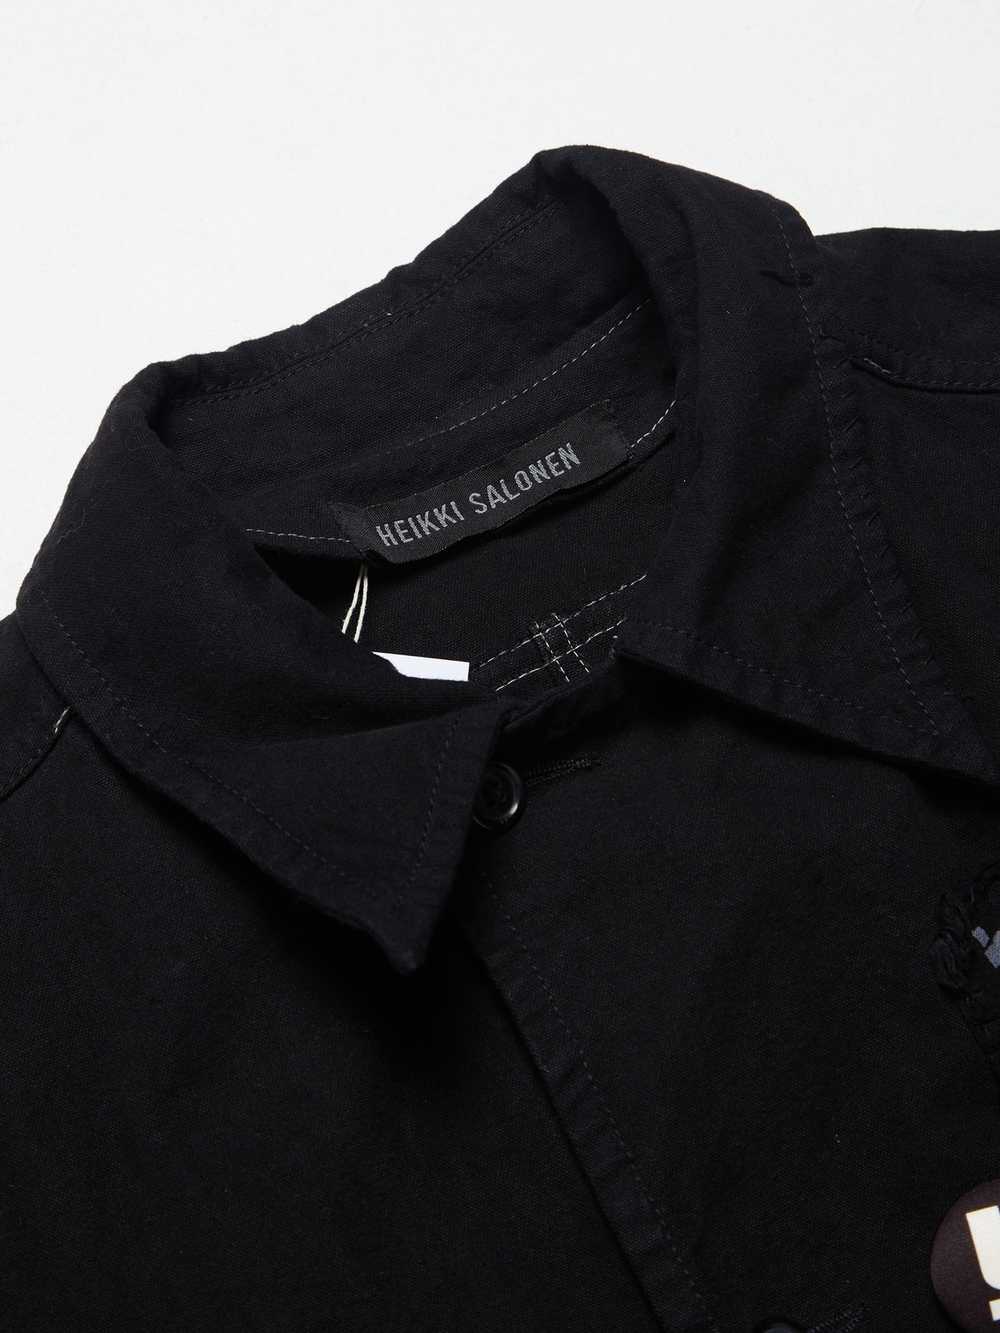 Other Black Pinned And Patched Denim Overshirt - image 3